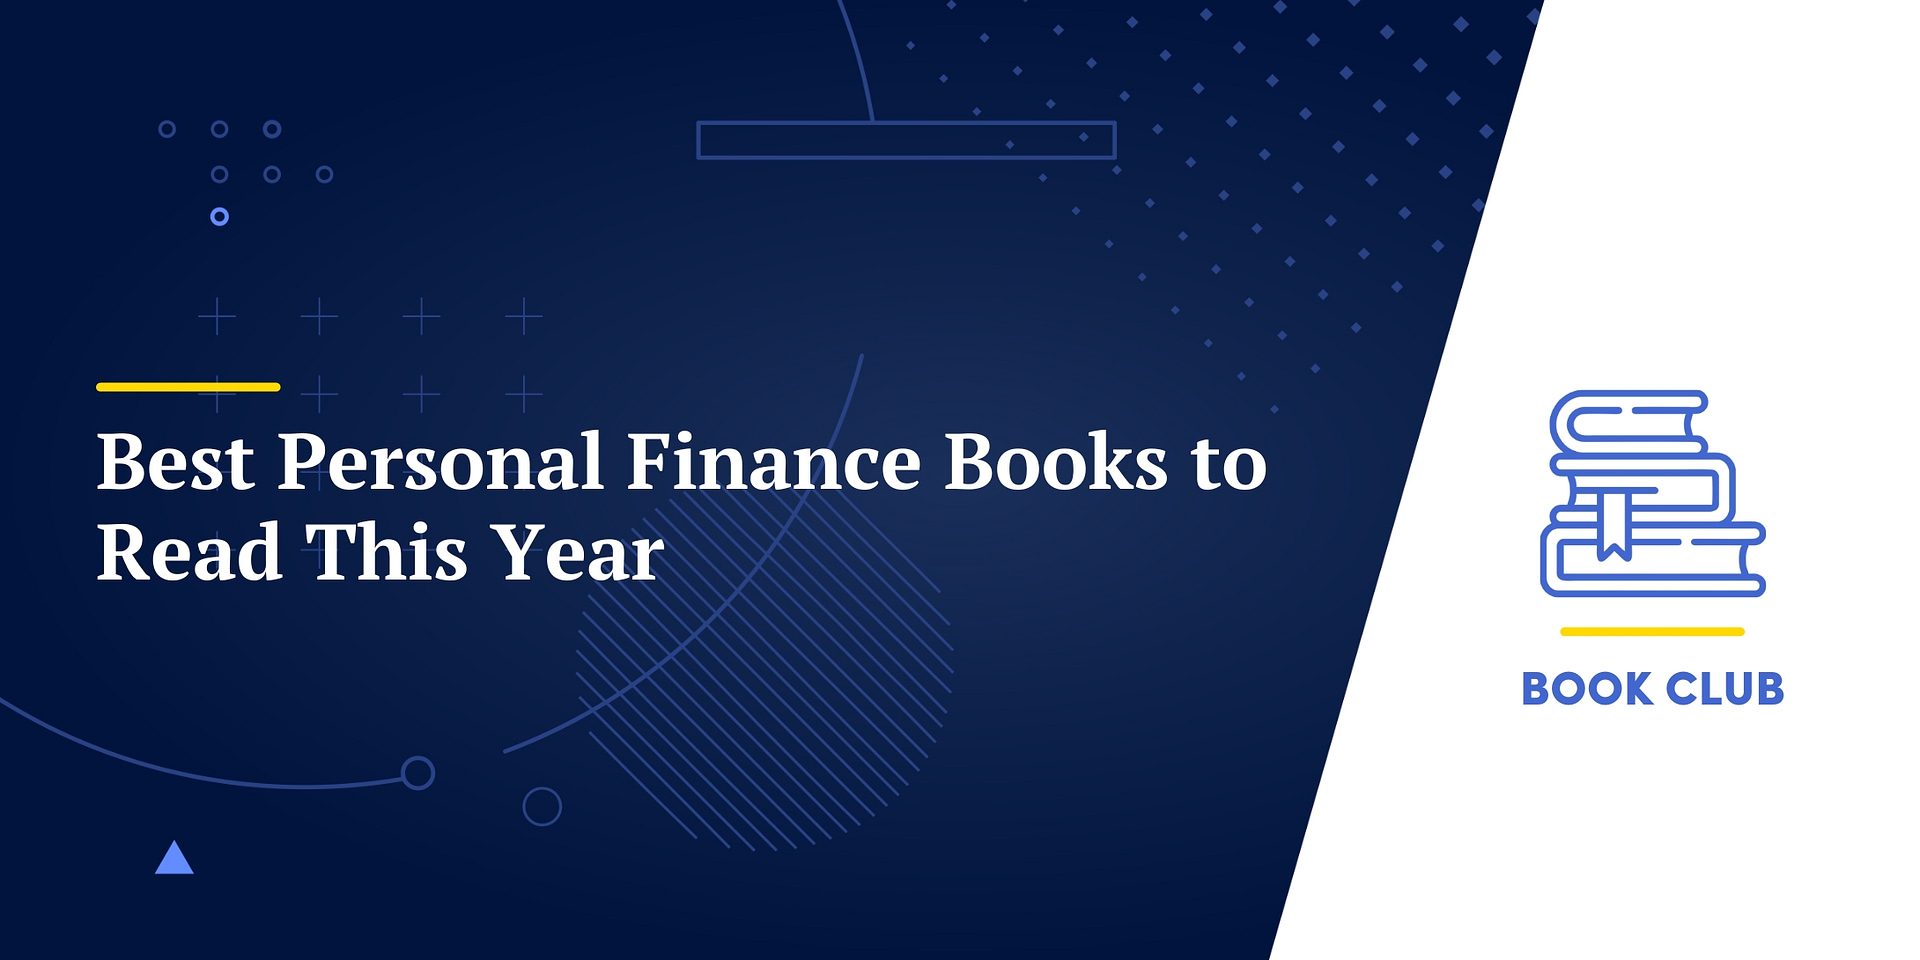 5 Personal Finance Books Everyone Should Read - Mindset Reading